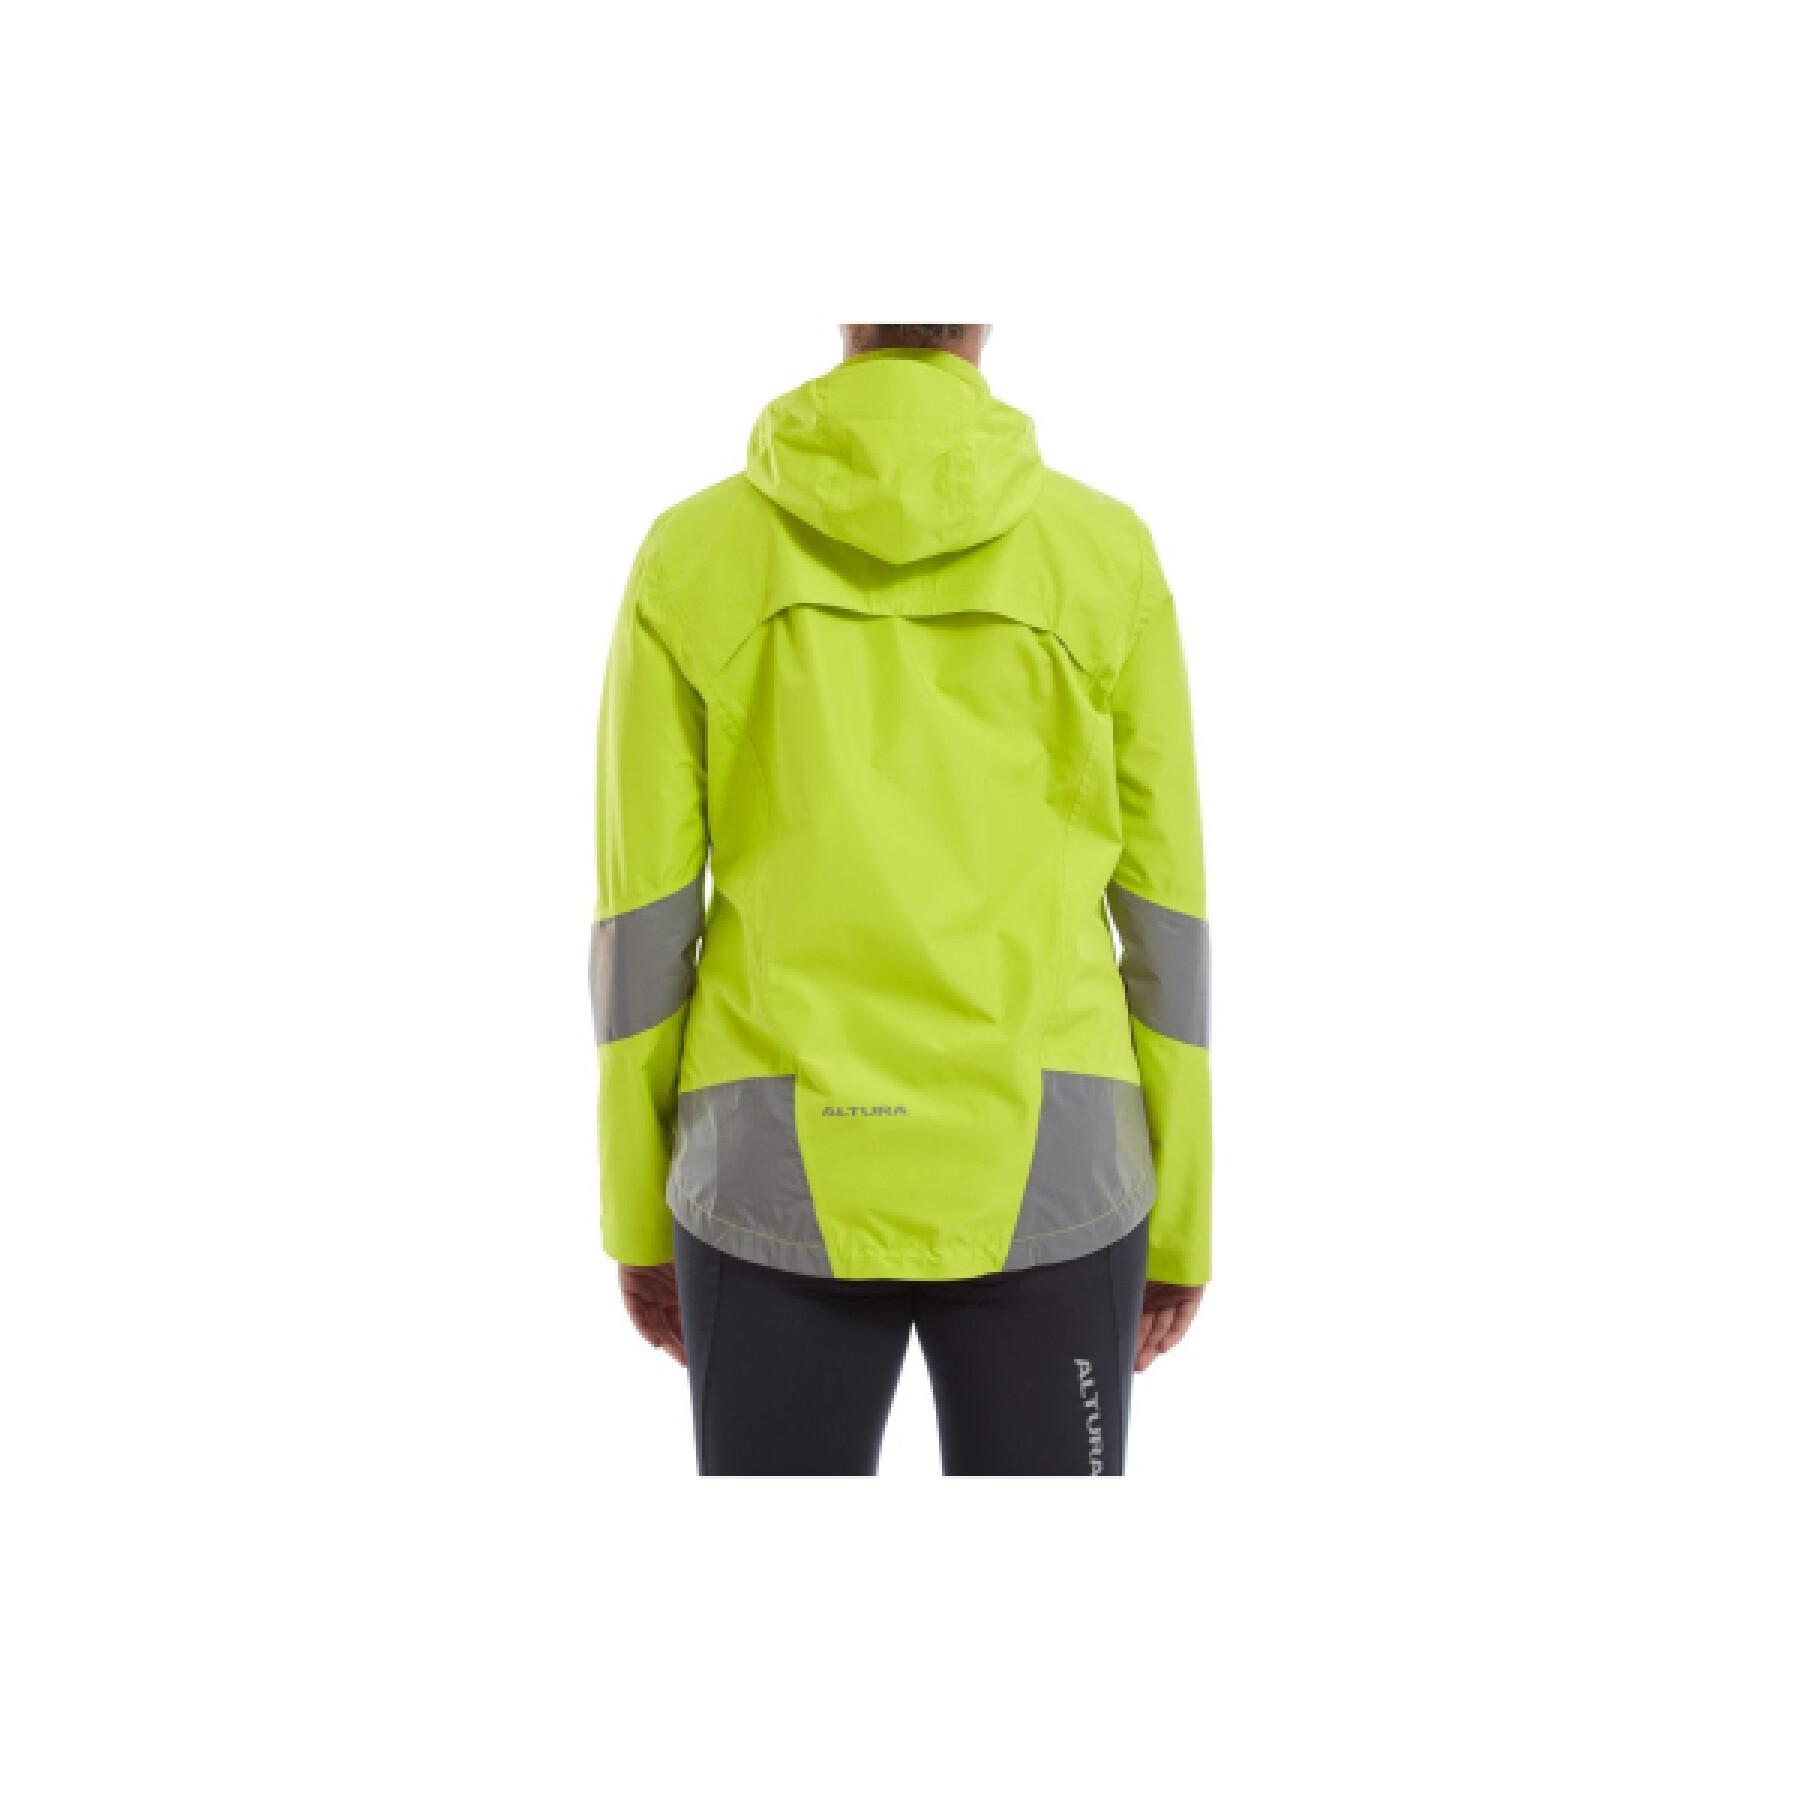 Chaqueta impermeable mujer Altura Typhoon Nightvision